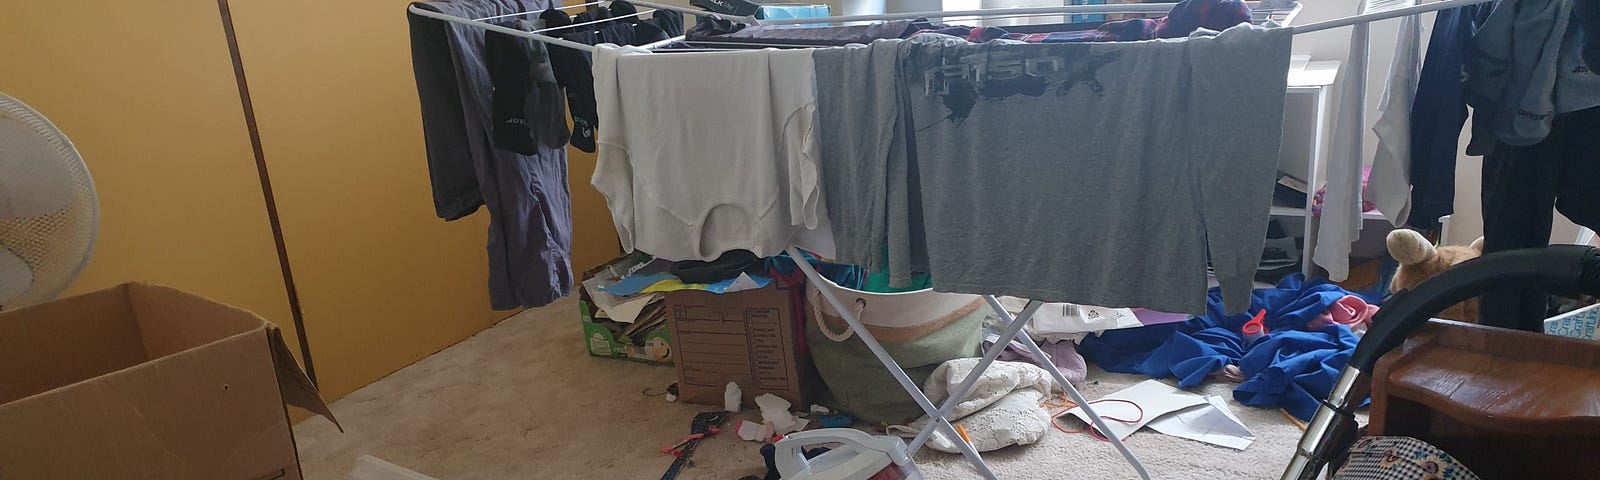 A photo showing a very messy room. Stuff all over the floor. A clothes horse with clothing draped on it fo rdrying. So much chaos! Photo by Ann Leach.